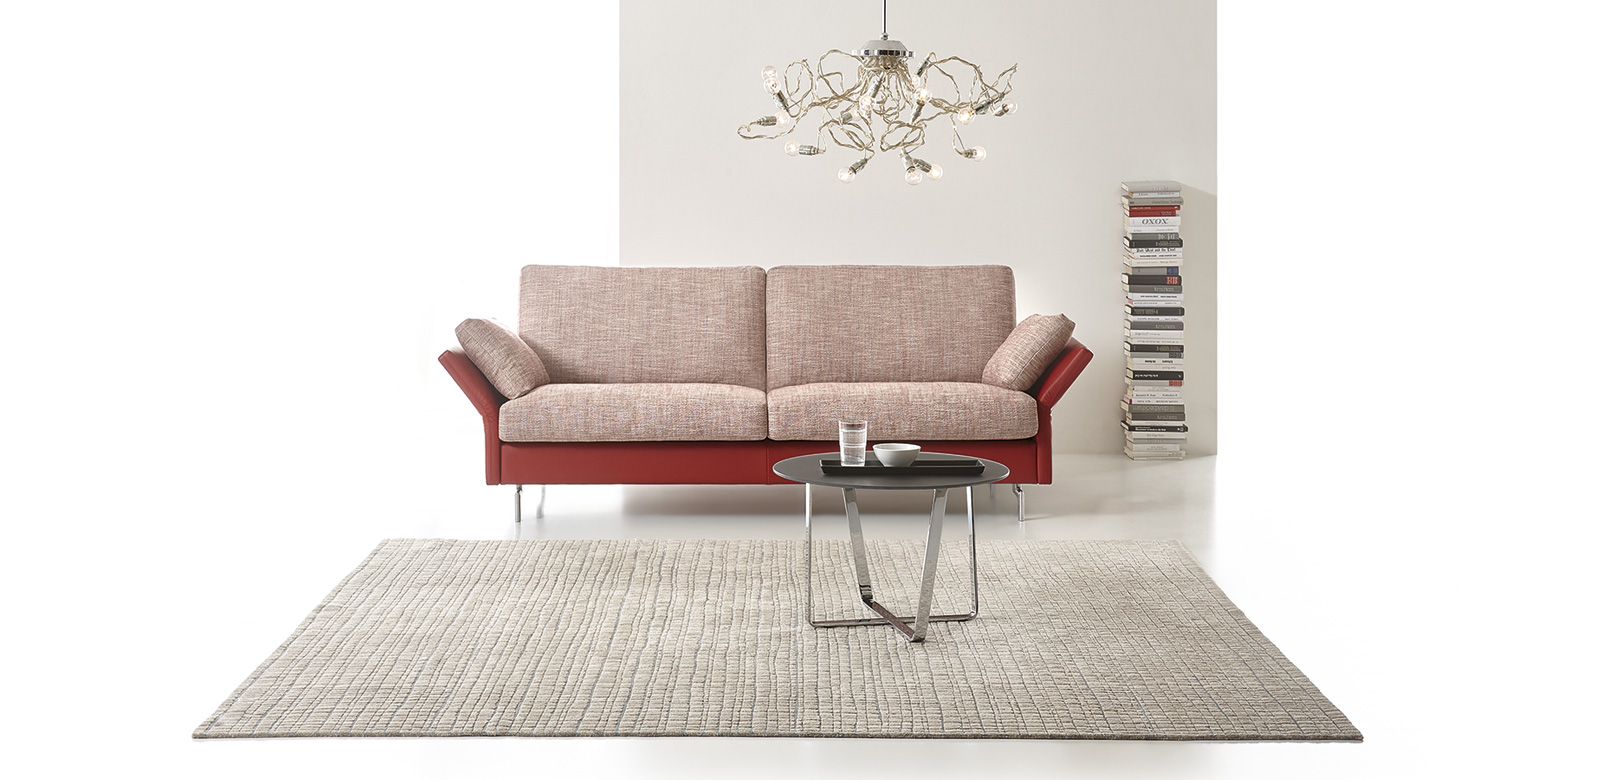 CL990 Sofa in red and white fabric combined with red leather elements